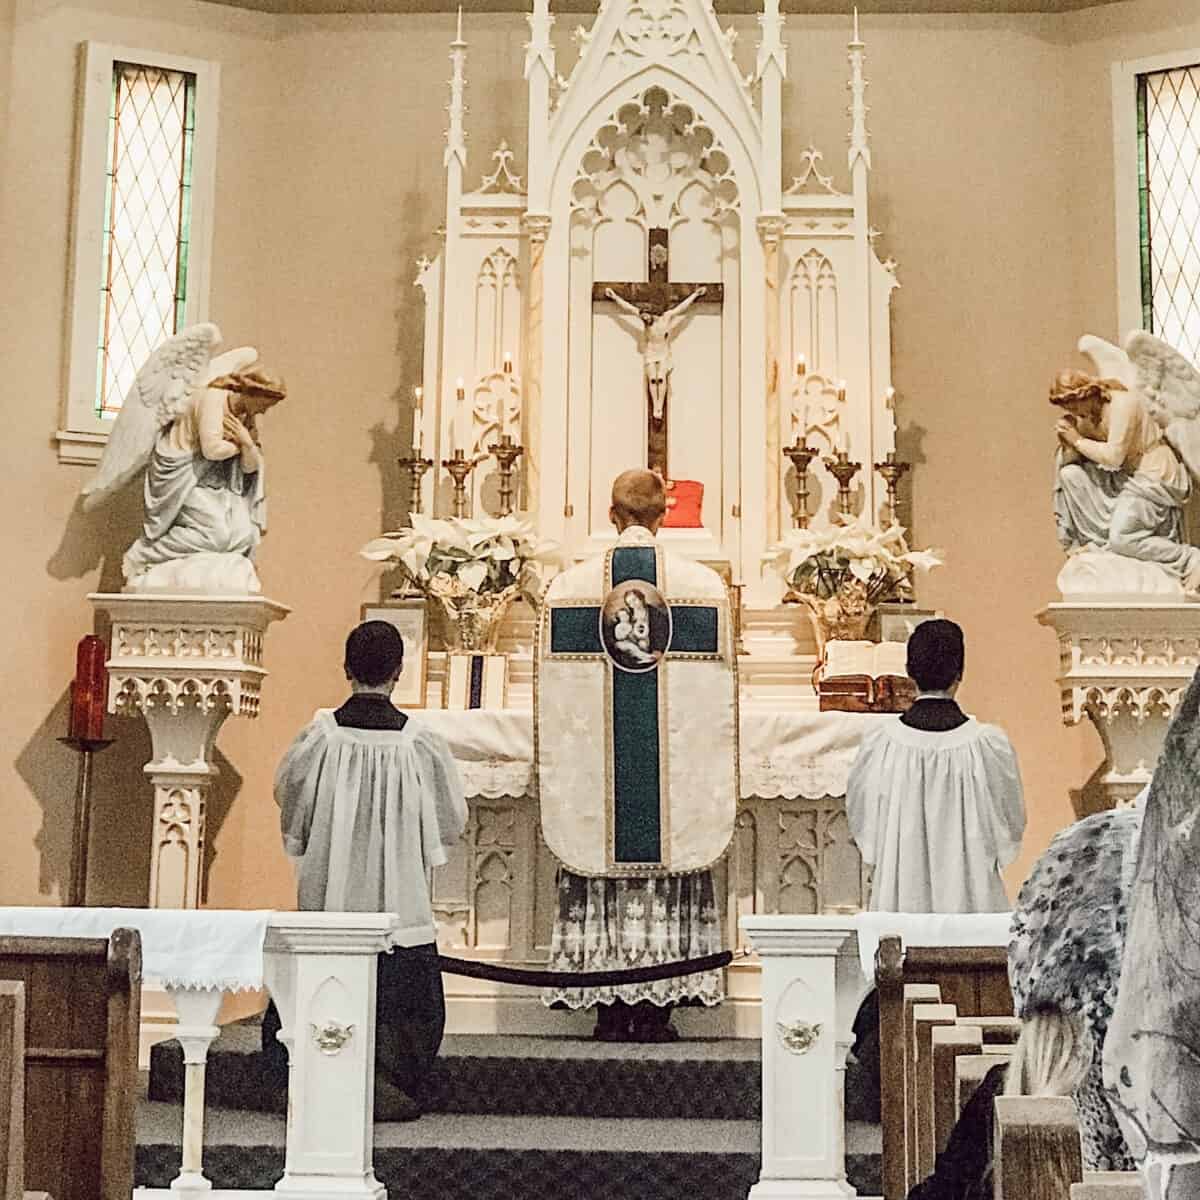 Father offering Holy Mass on a Sunday in the church